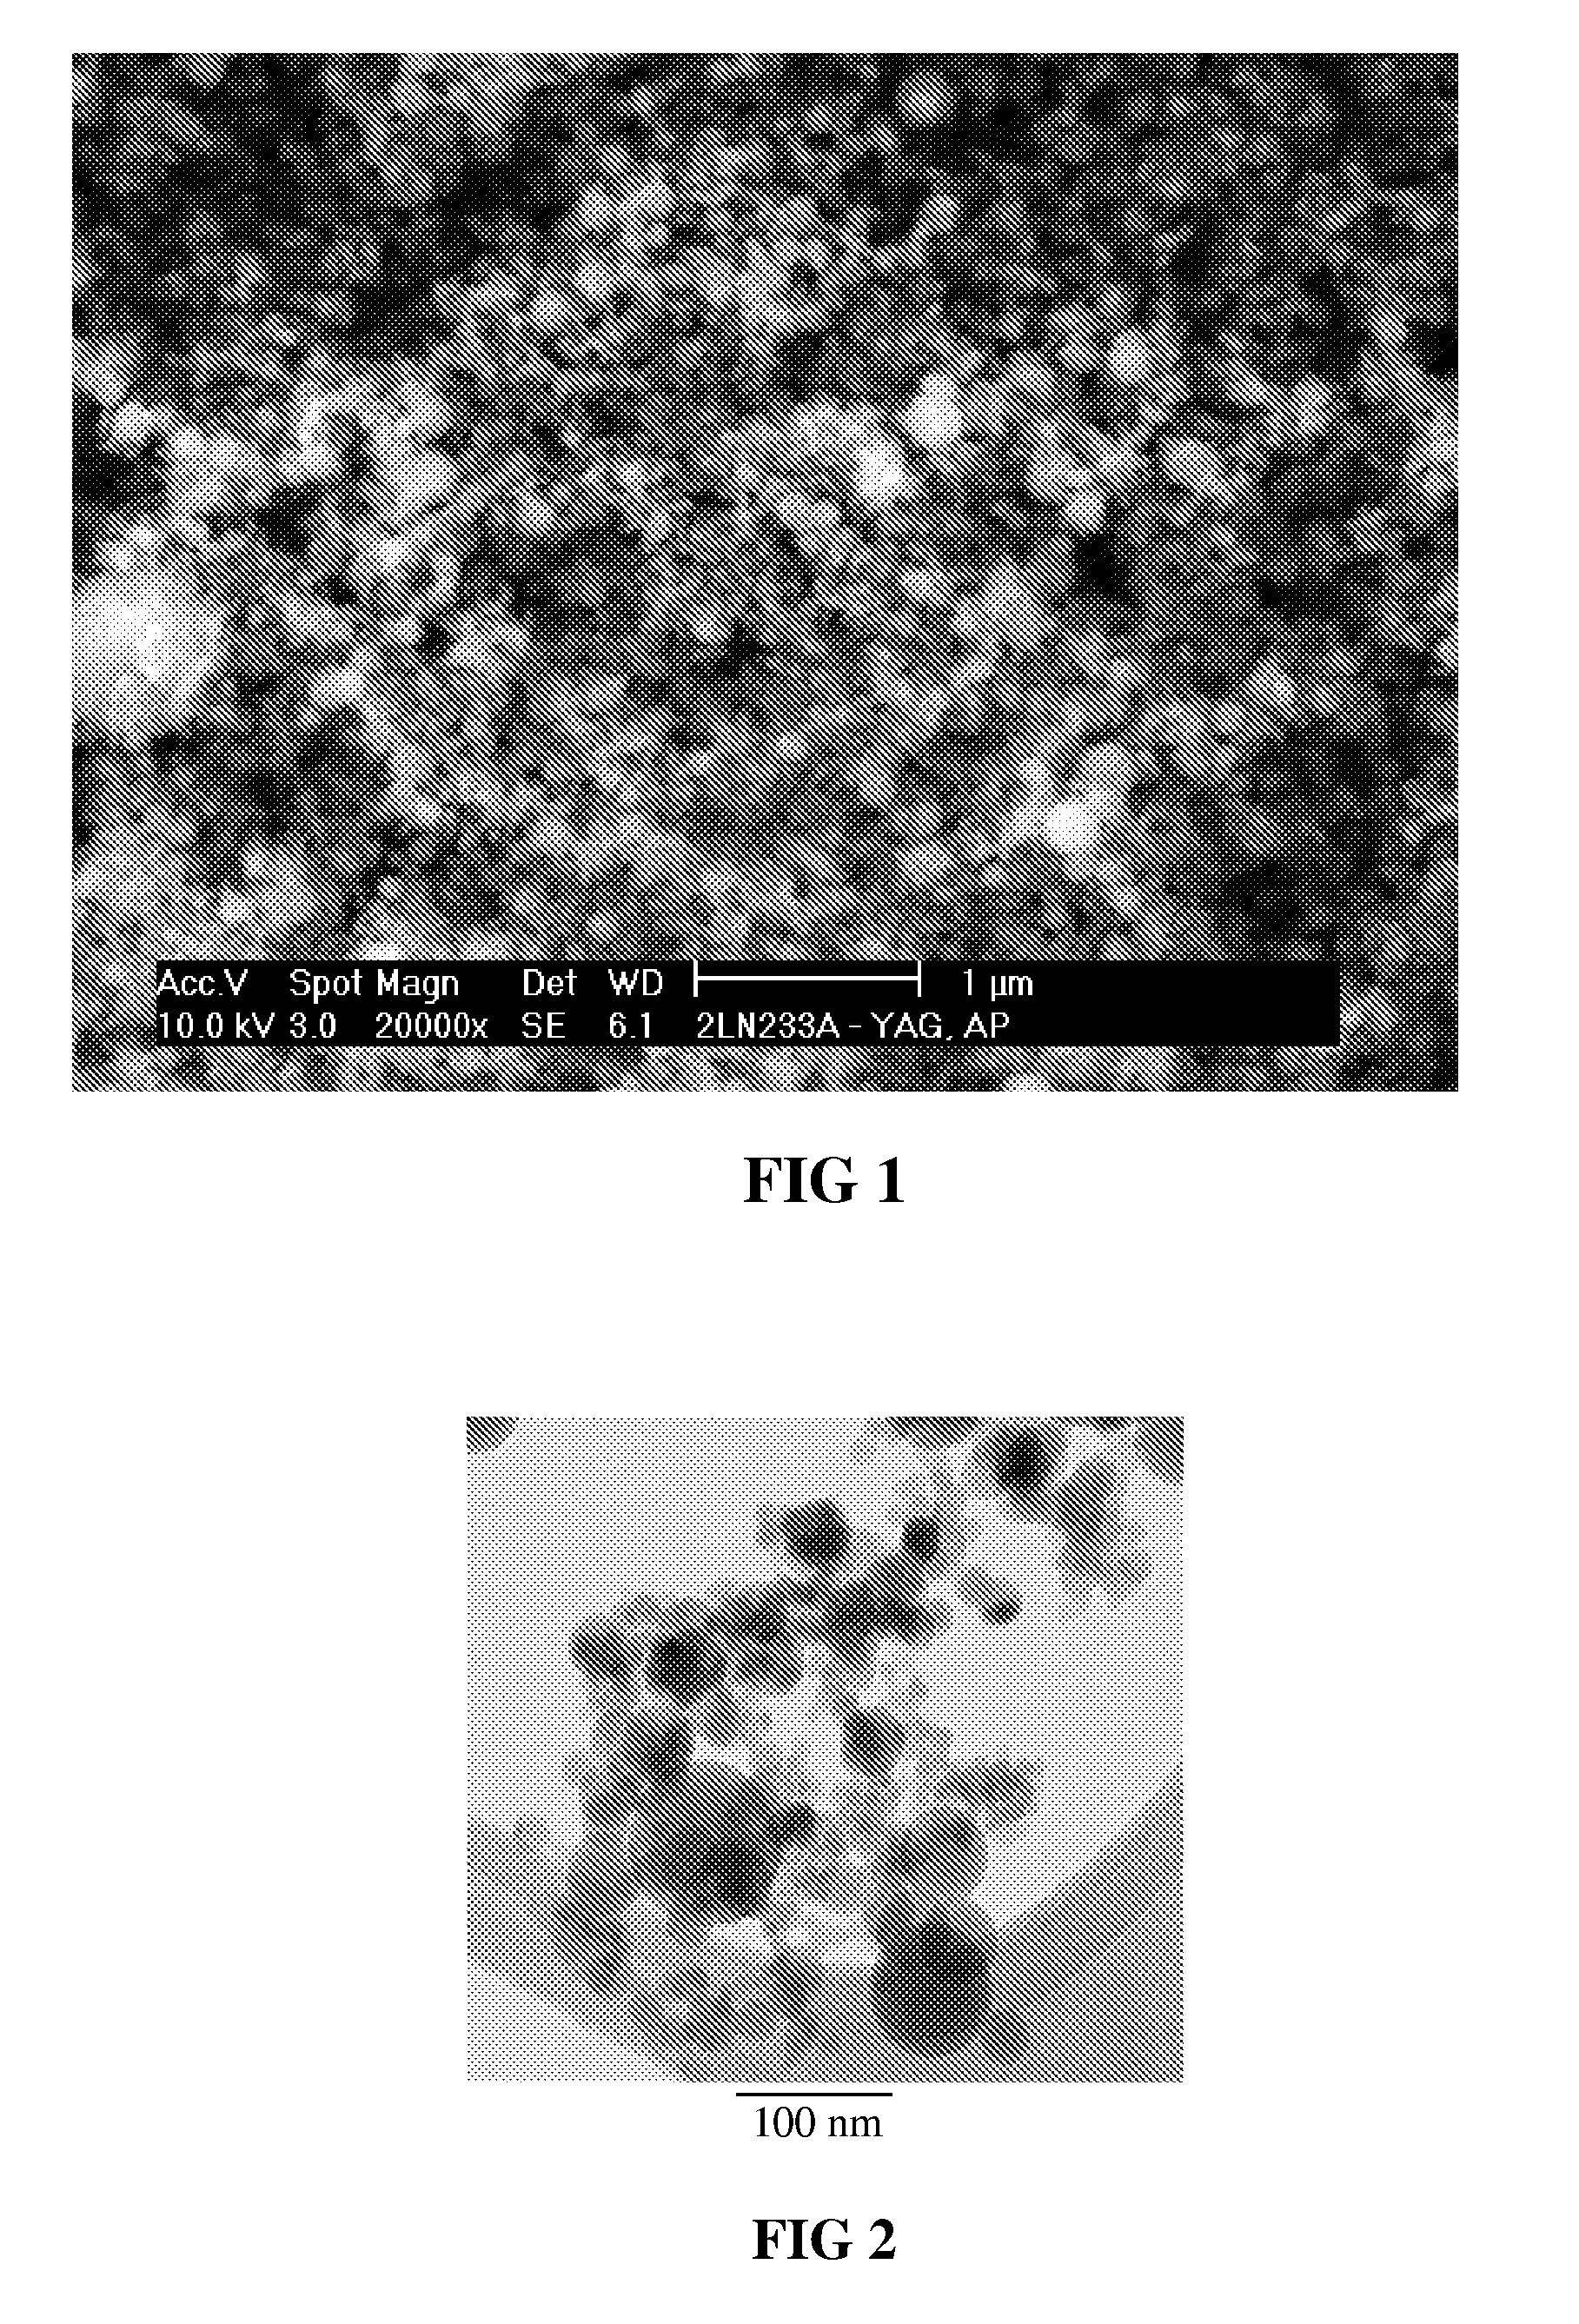 Sintered polycrystalline yttrium aluminum garnet and use thereof in optical devices